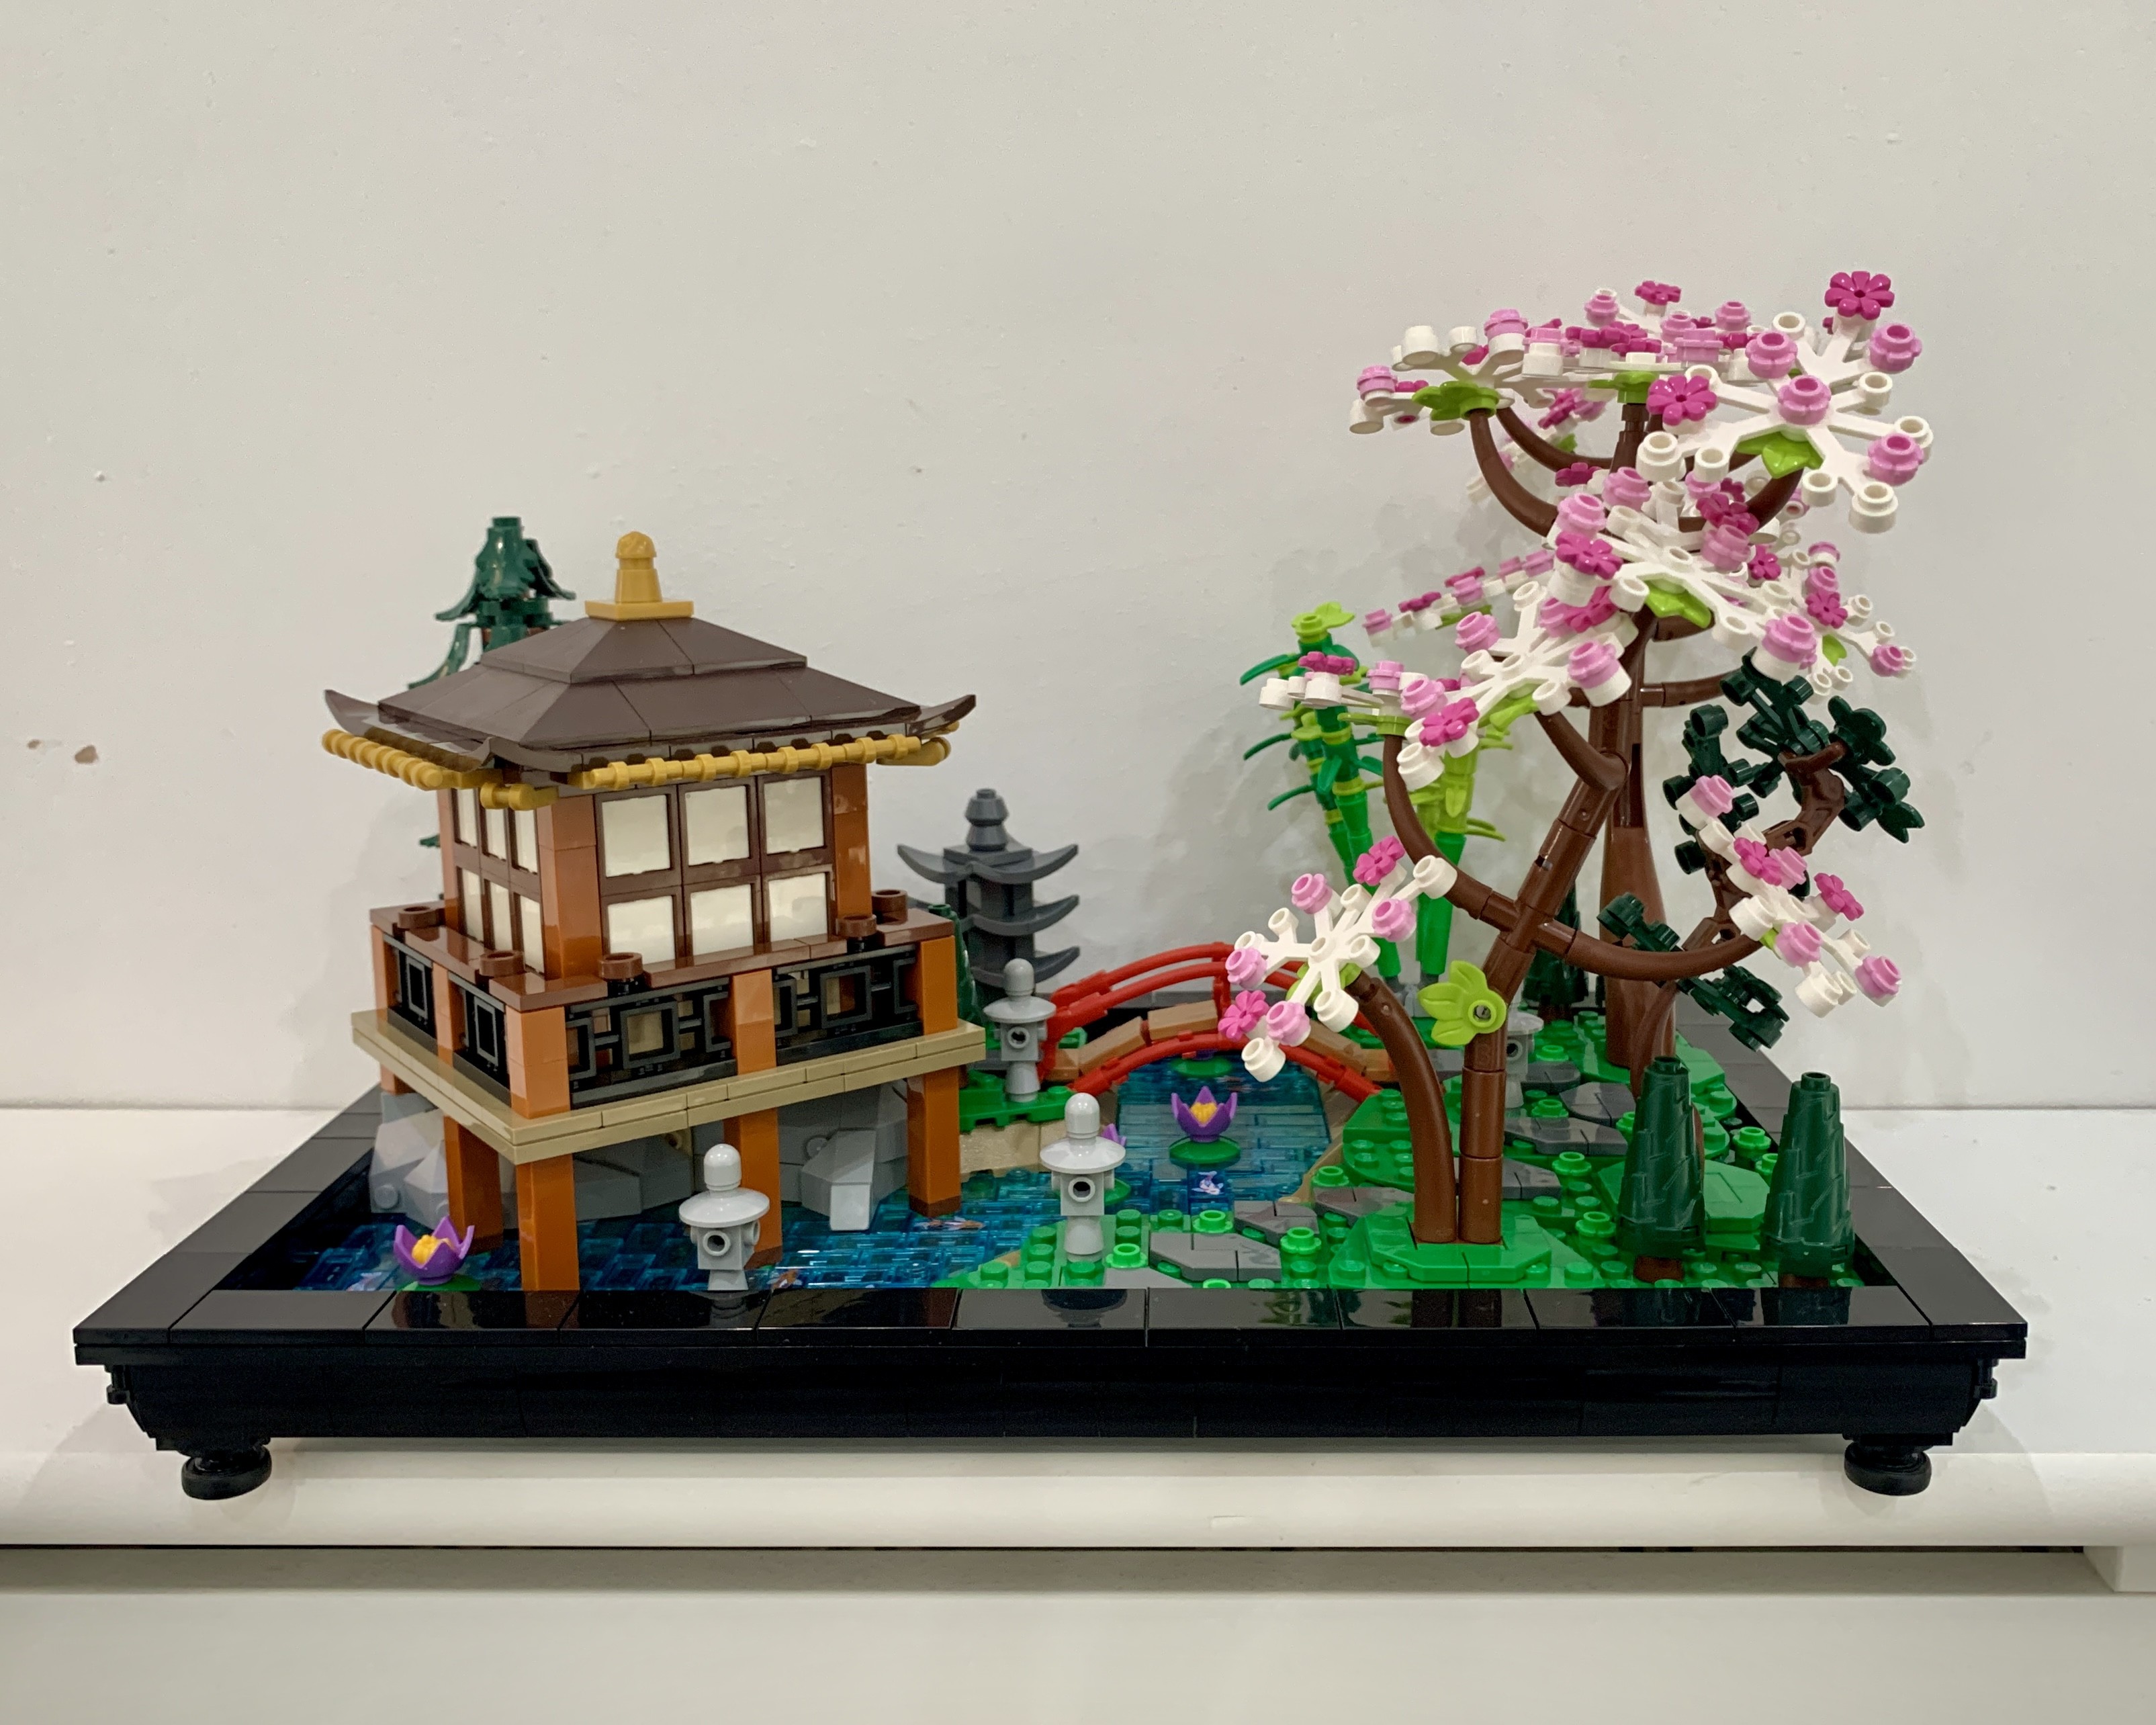 Built Lego tranquil garden. It is a Japanese-inspired garden scene with a wooden pavilion, red arched bridge, stream, koi carp tiles, lotus flowers, trees, rocks and lanterns. It is surrounded by a black border.